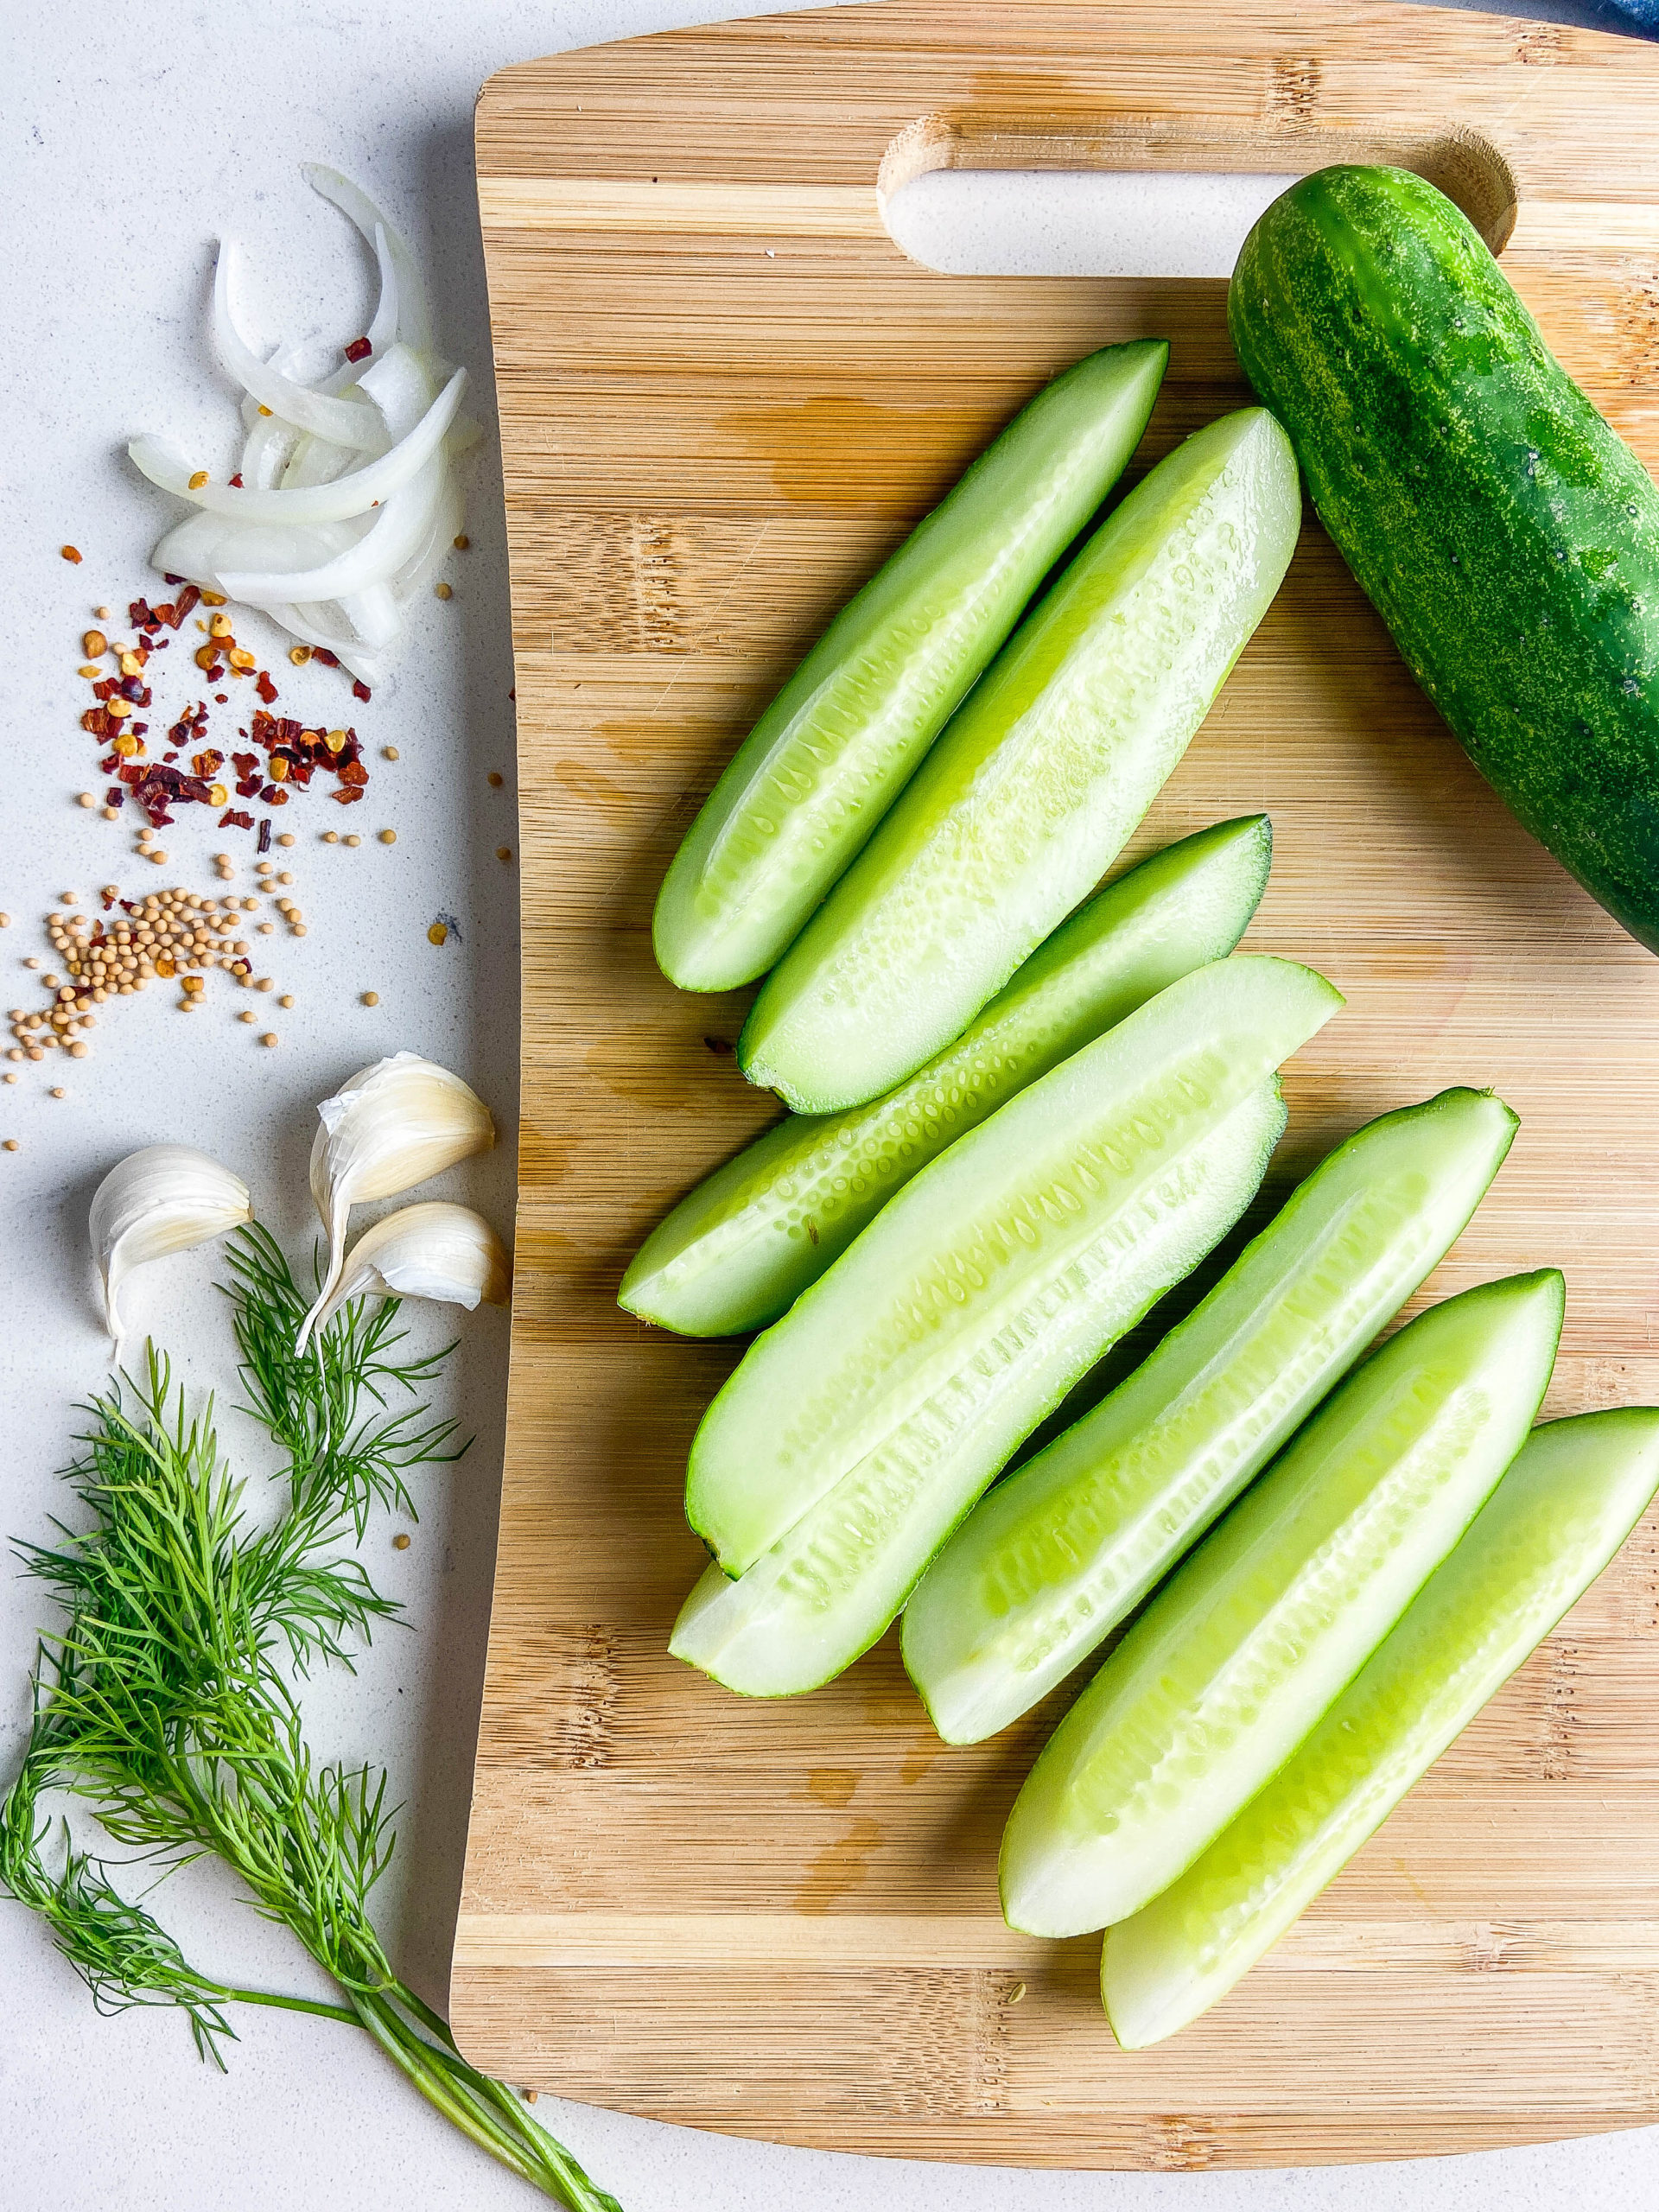 Cucumber spears on a wooden cutting board with dill, garlic cloves, mustard seeds and crushed red peppers. 